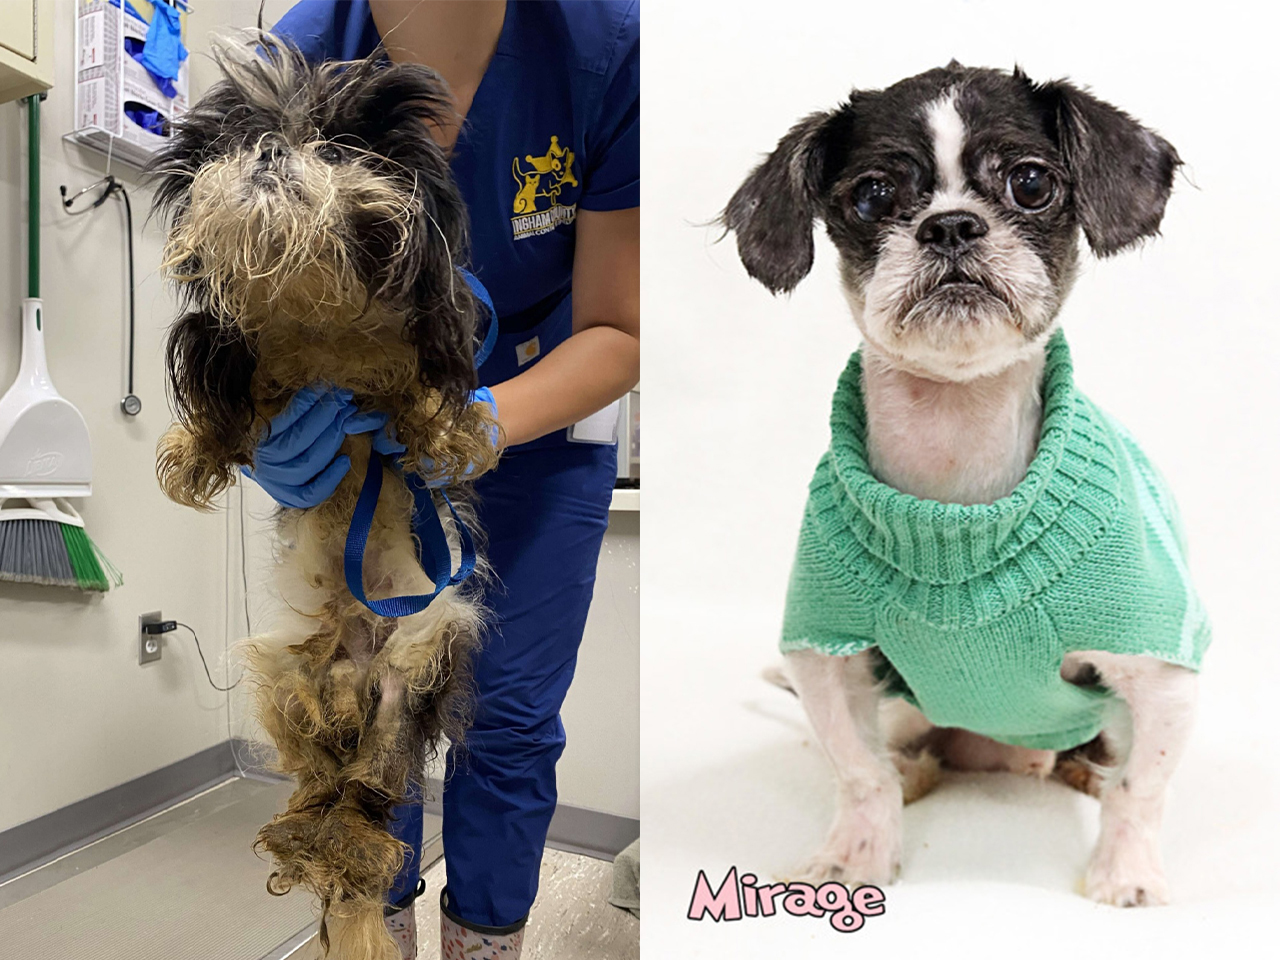 Mirage arrived at her shelter in Mason, MI, as a severely matted little Shih Tzu. The shelter staff used fear-free grooming techniques to ensure Mirage's experience was as stress-free as possible. And after shaving him down, they discovered an emaciated little guy with injuries to his eyes from the mats and burns on his feet from urine. Despite everything, he’s a happy pup who absolutely loves people. Not surprisingly, Mirage was quickly adopted and is happily living in his forever home.